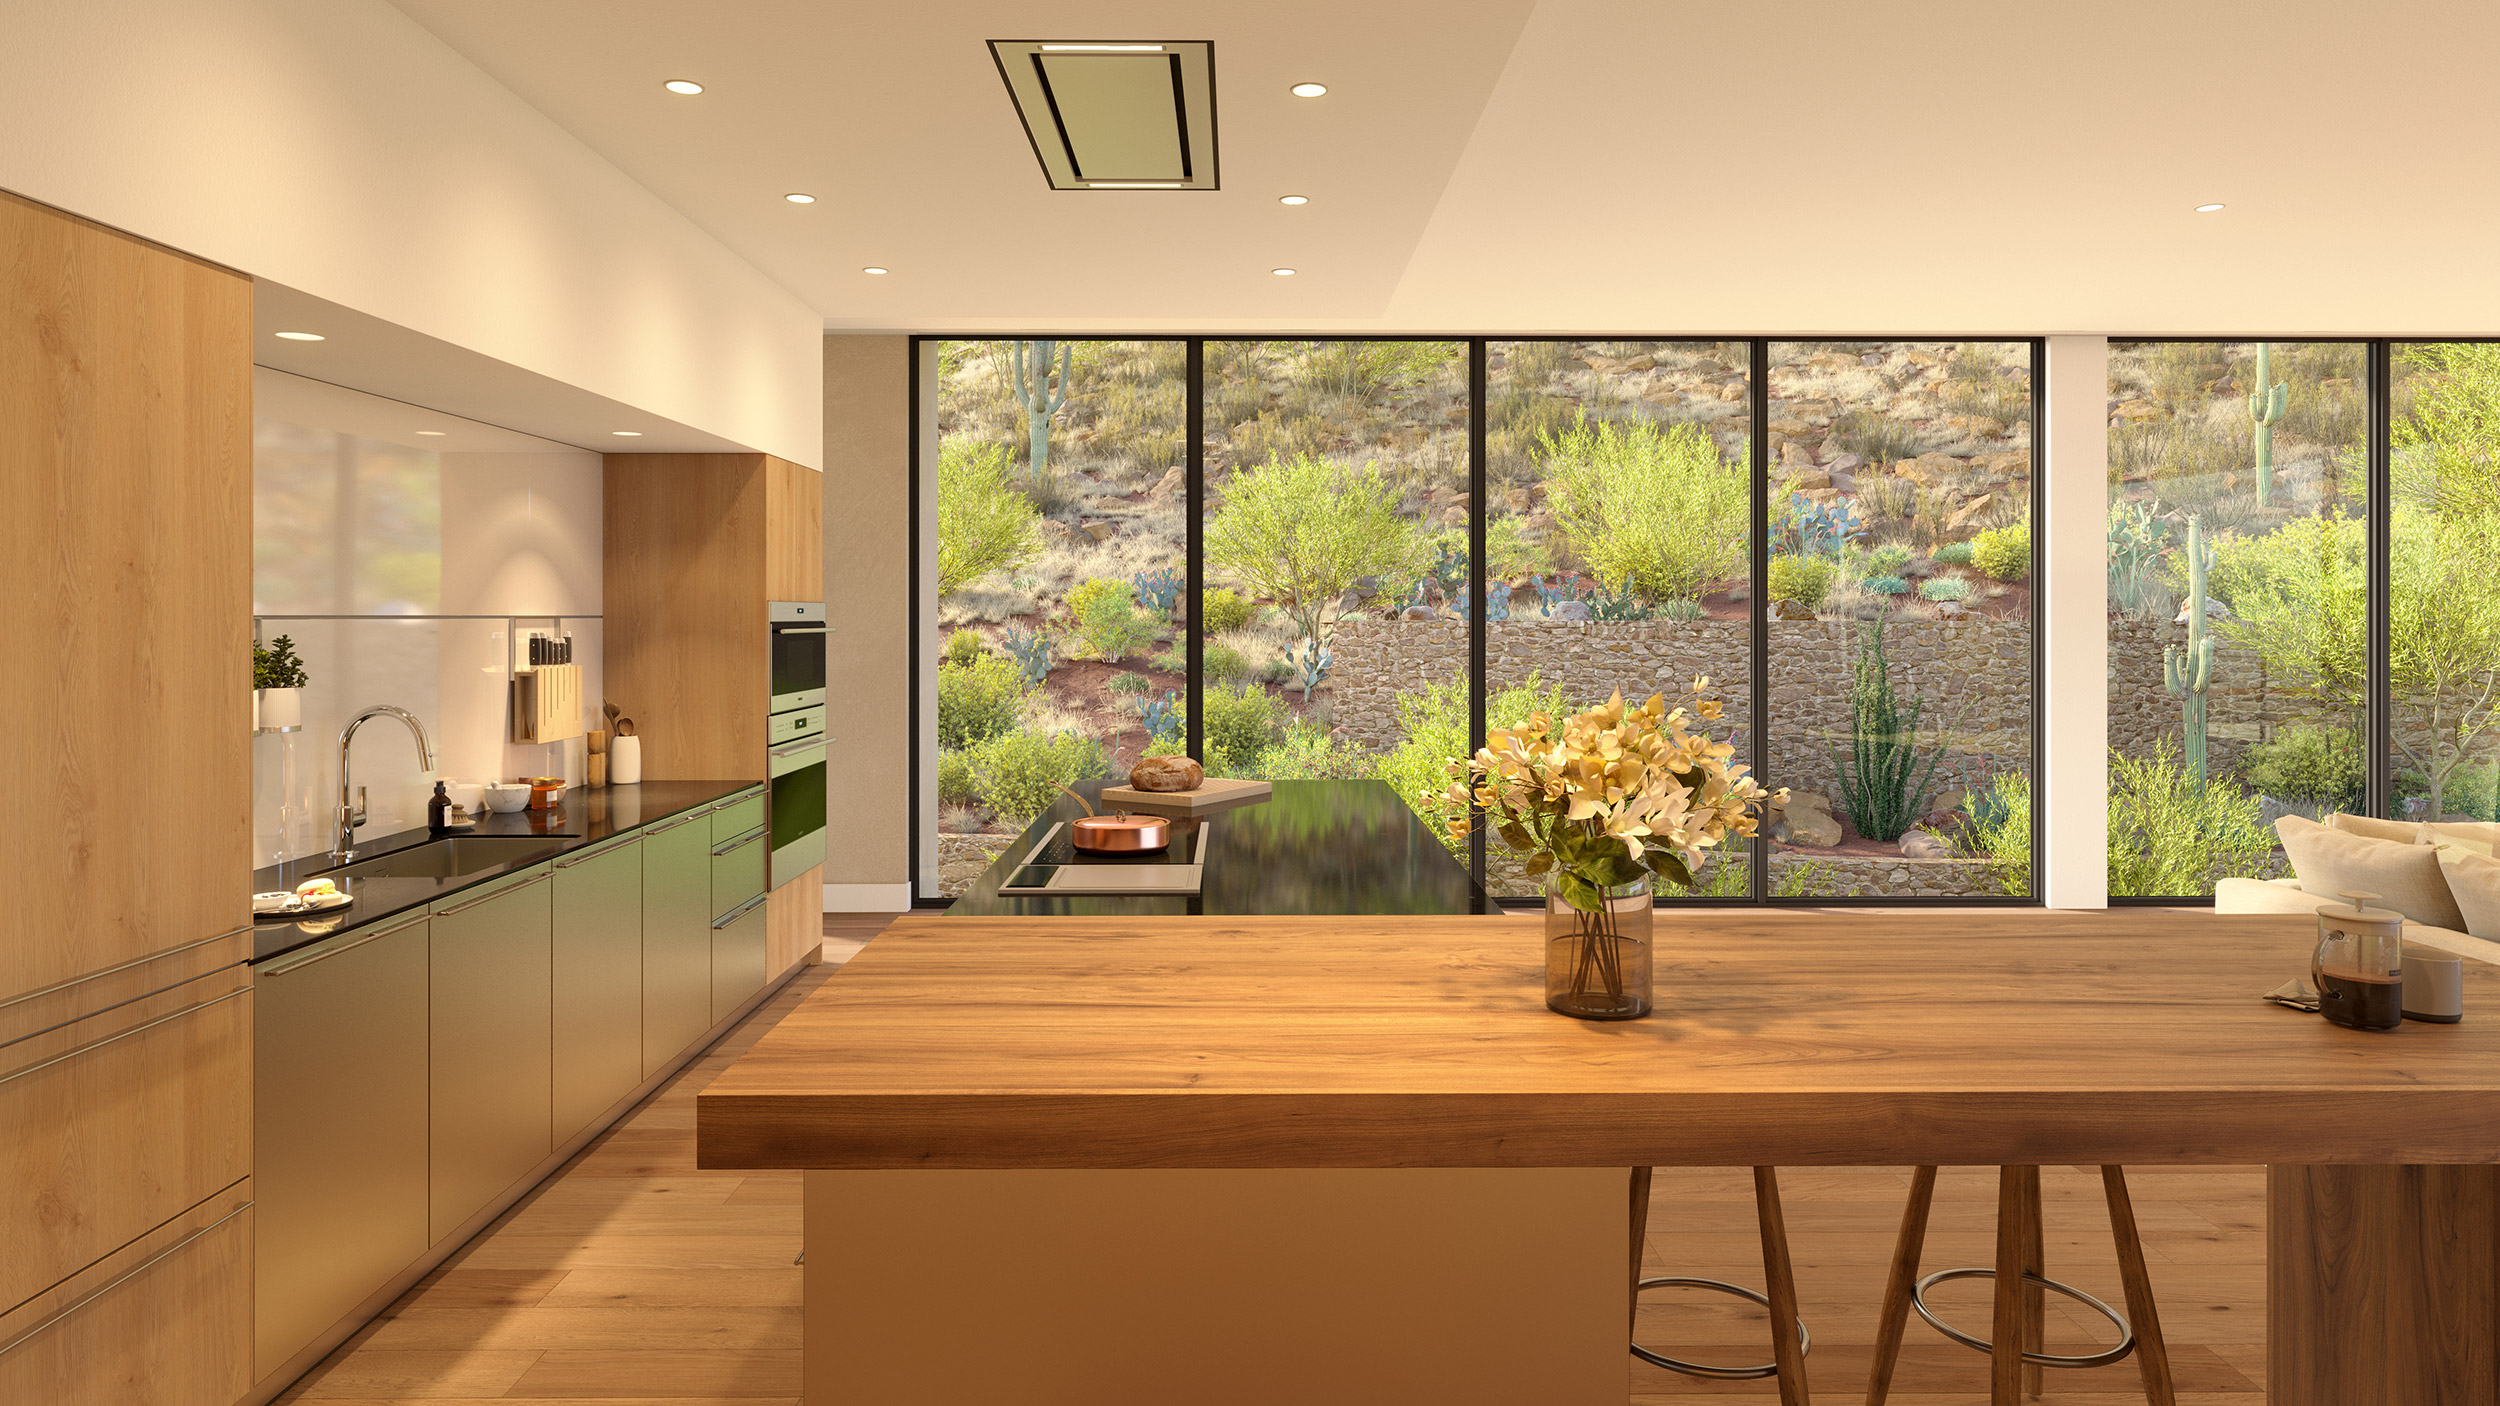 bulthaup kitchens exemplifying precision modern design while evoking a warm, inviting ambiance.